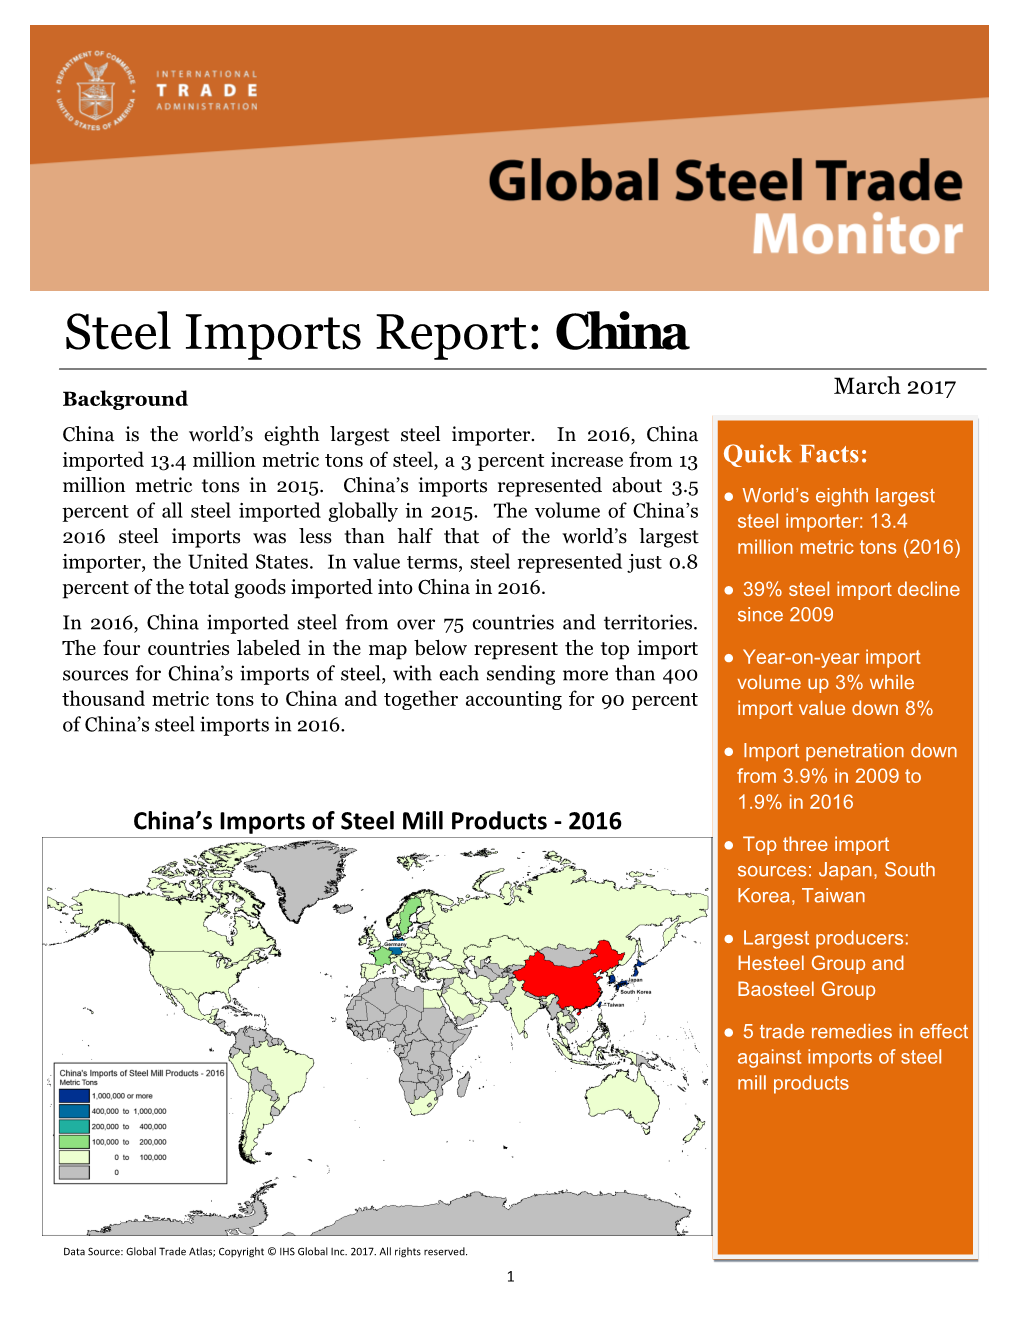 Steel Imports Report: China March 2017 Background China Is the World’S Eighth Largest Steel Importer